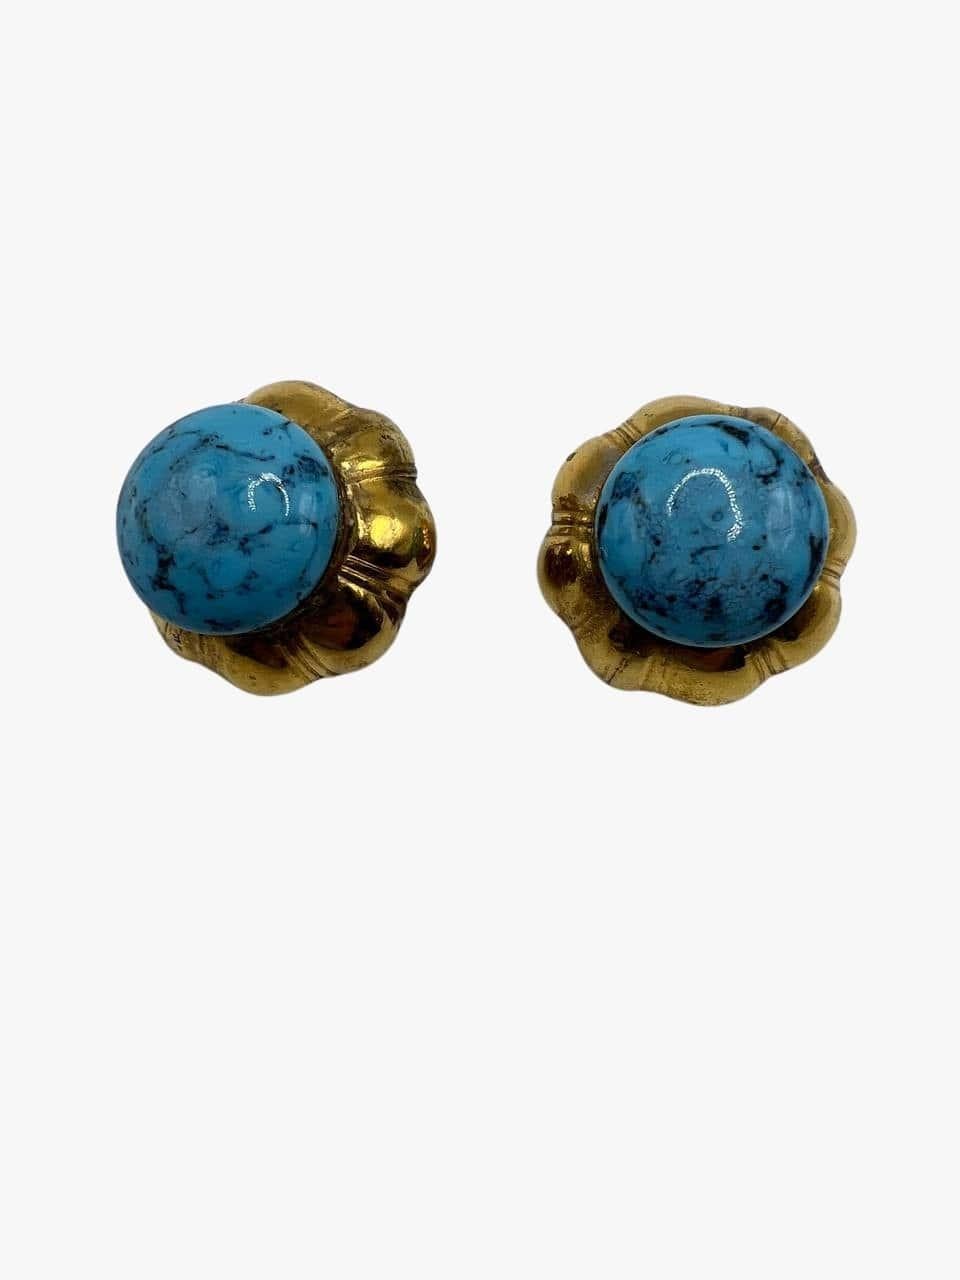 Vintage Chanel clip-on earrings embellished with a large turquoise Gripoix glass cabochon in a rustic texture gold tone bezel. 

Signed. Chanel. 3 stars sign
Period: 1970s
Diameter: 3,5cm
Condition: very good. Light signs of time throughout metal